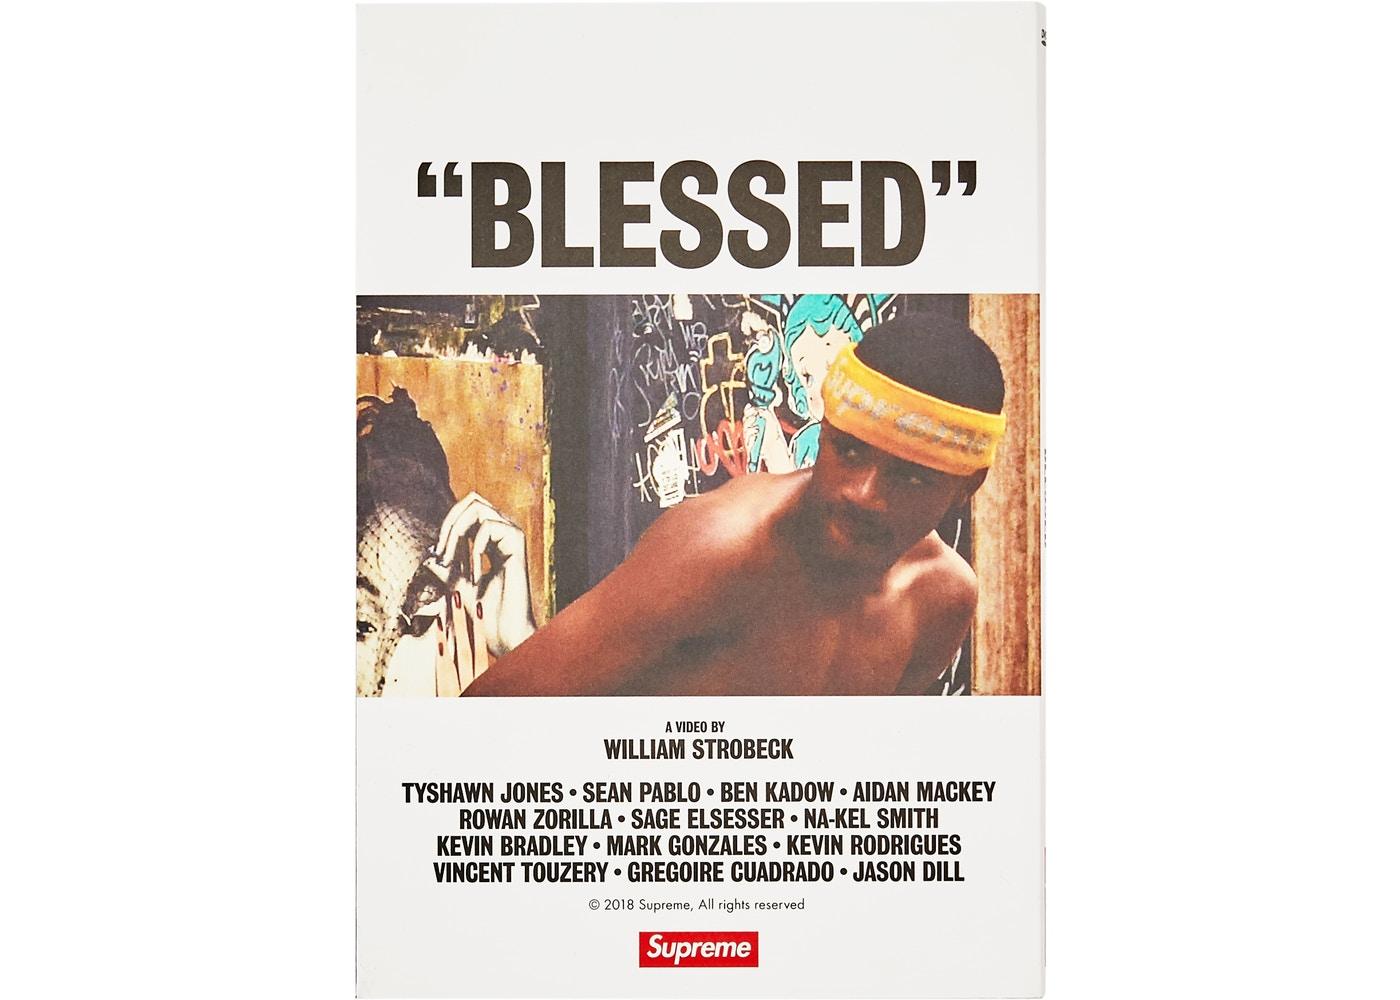 “BLESSED” DVD